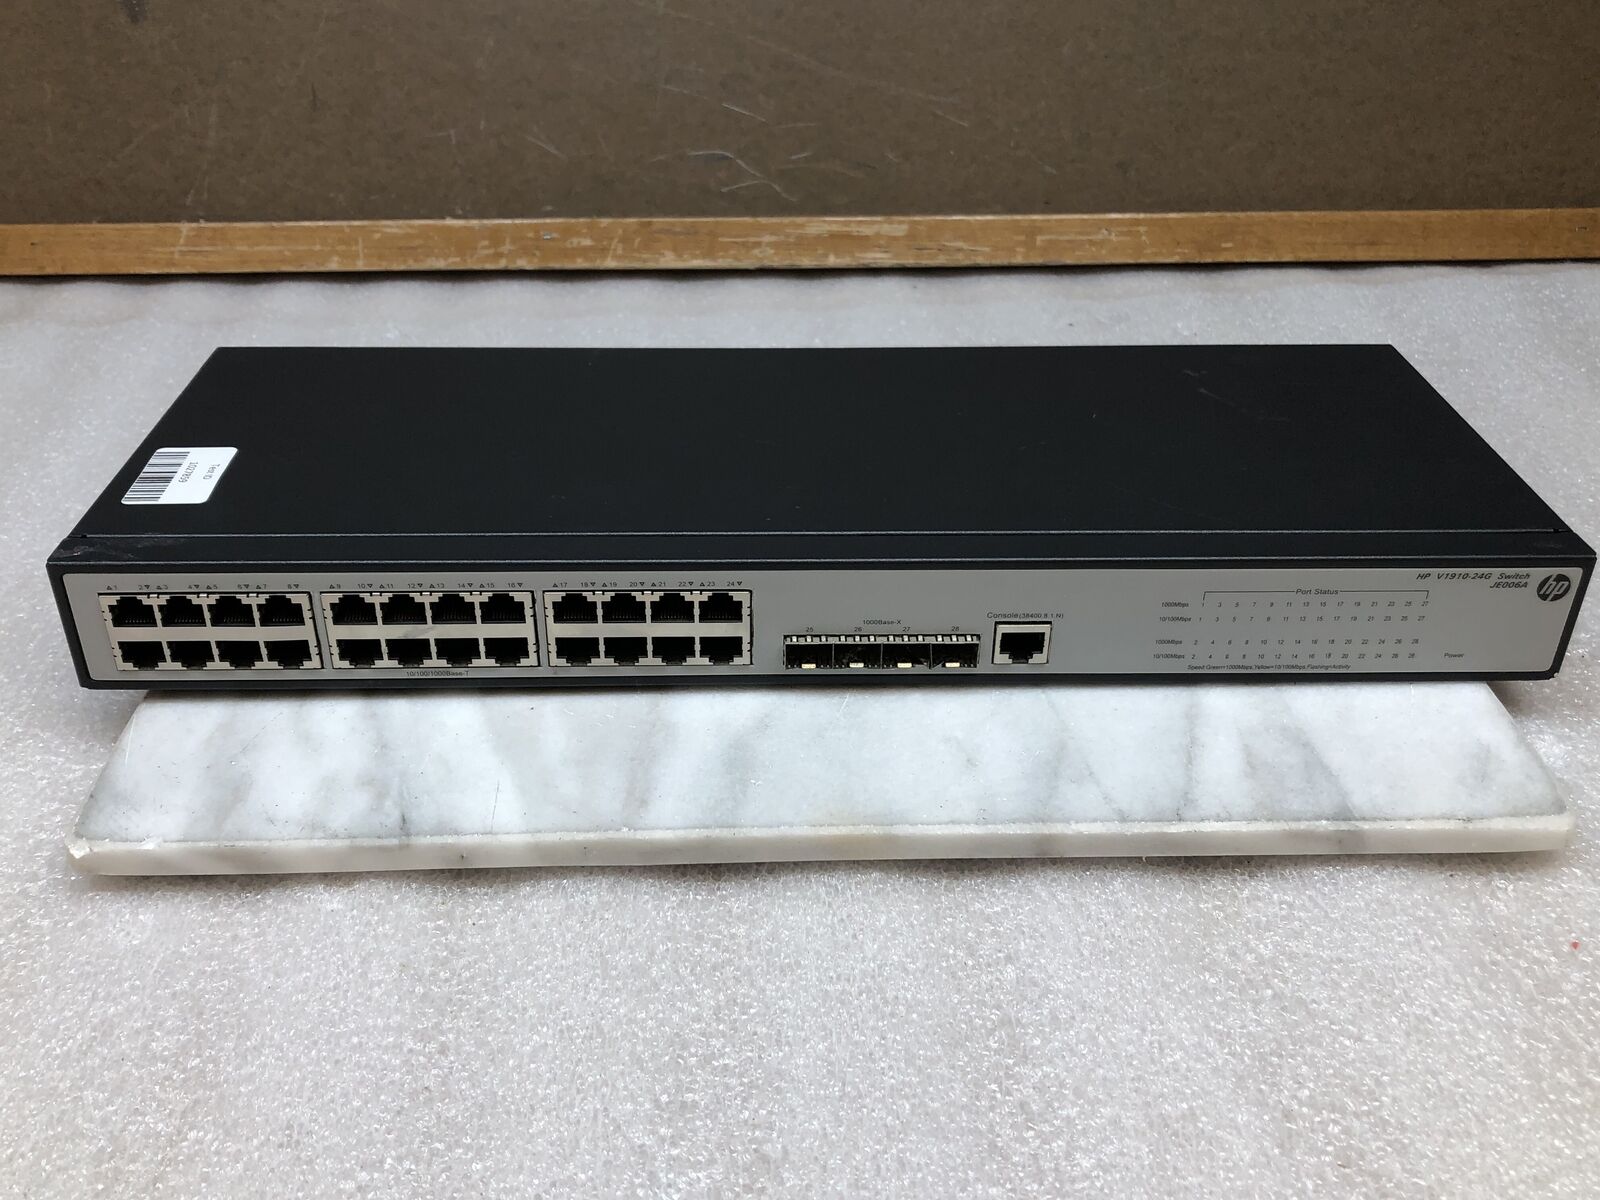 HP V1910-24G Gigabyte 24-Port Ethernet Network Switch JE006A W/ RS232 Console